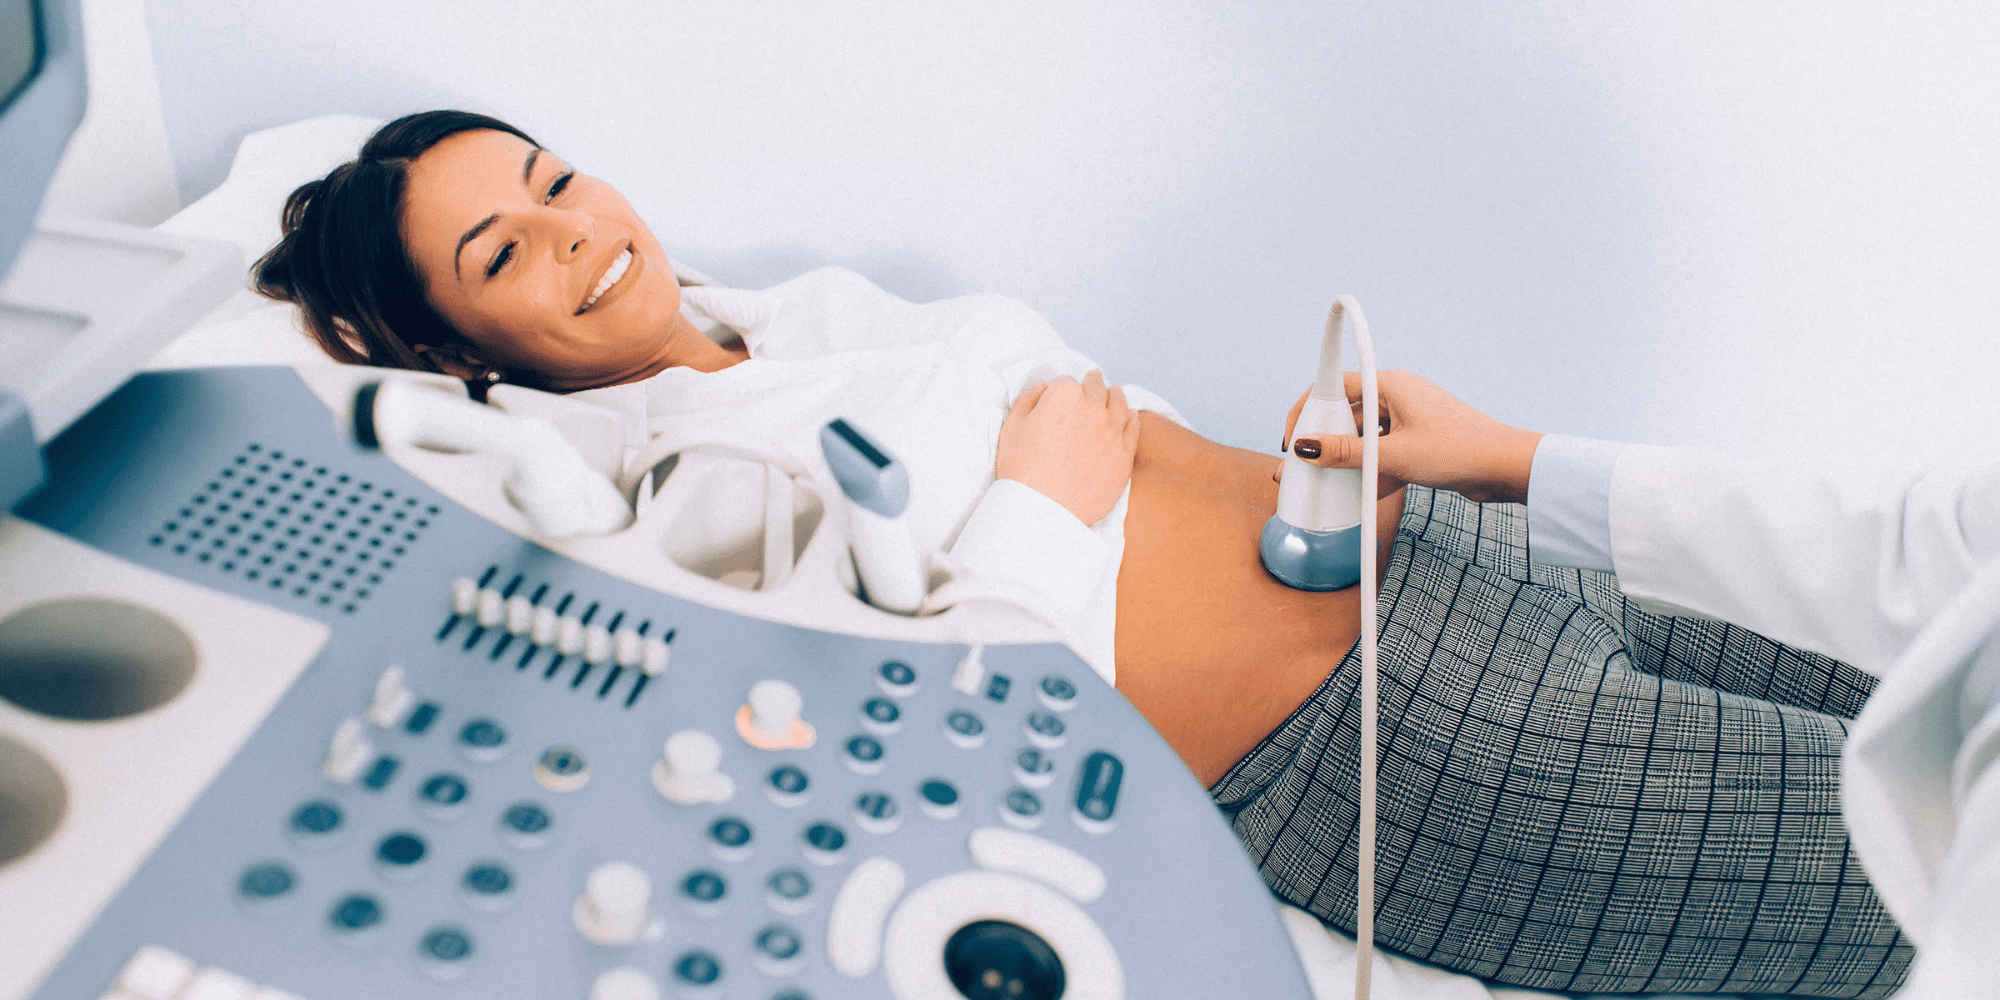 woman getting an ultrasound before an abortion